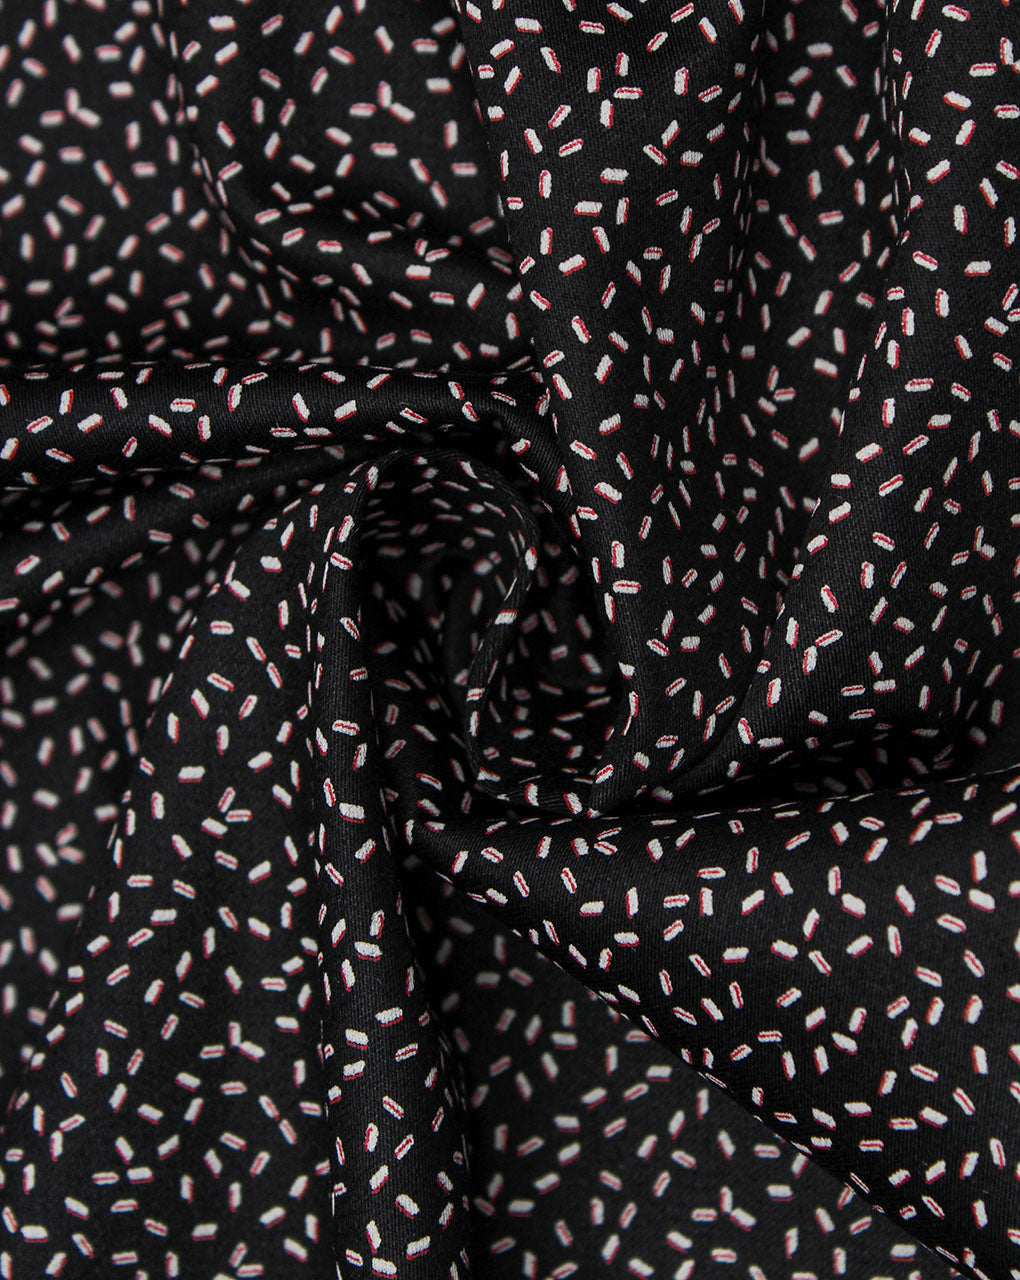 Black And White Abstract Design Cotton Print Fabric